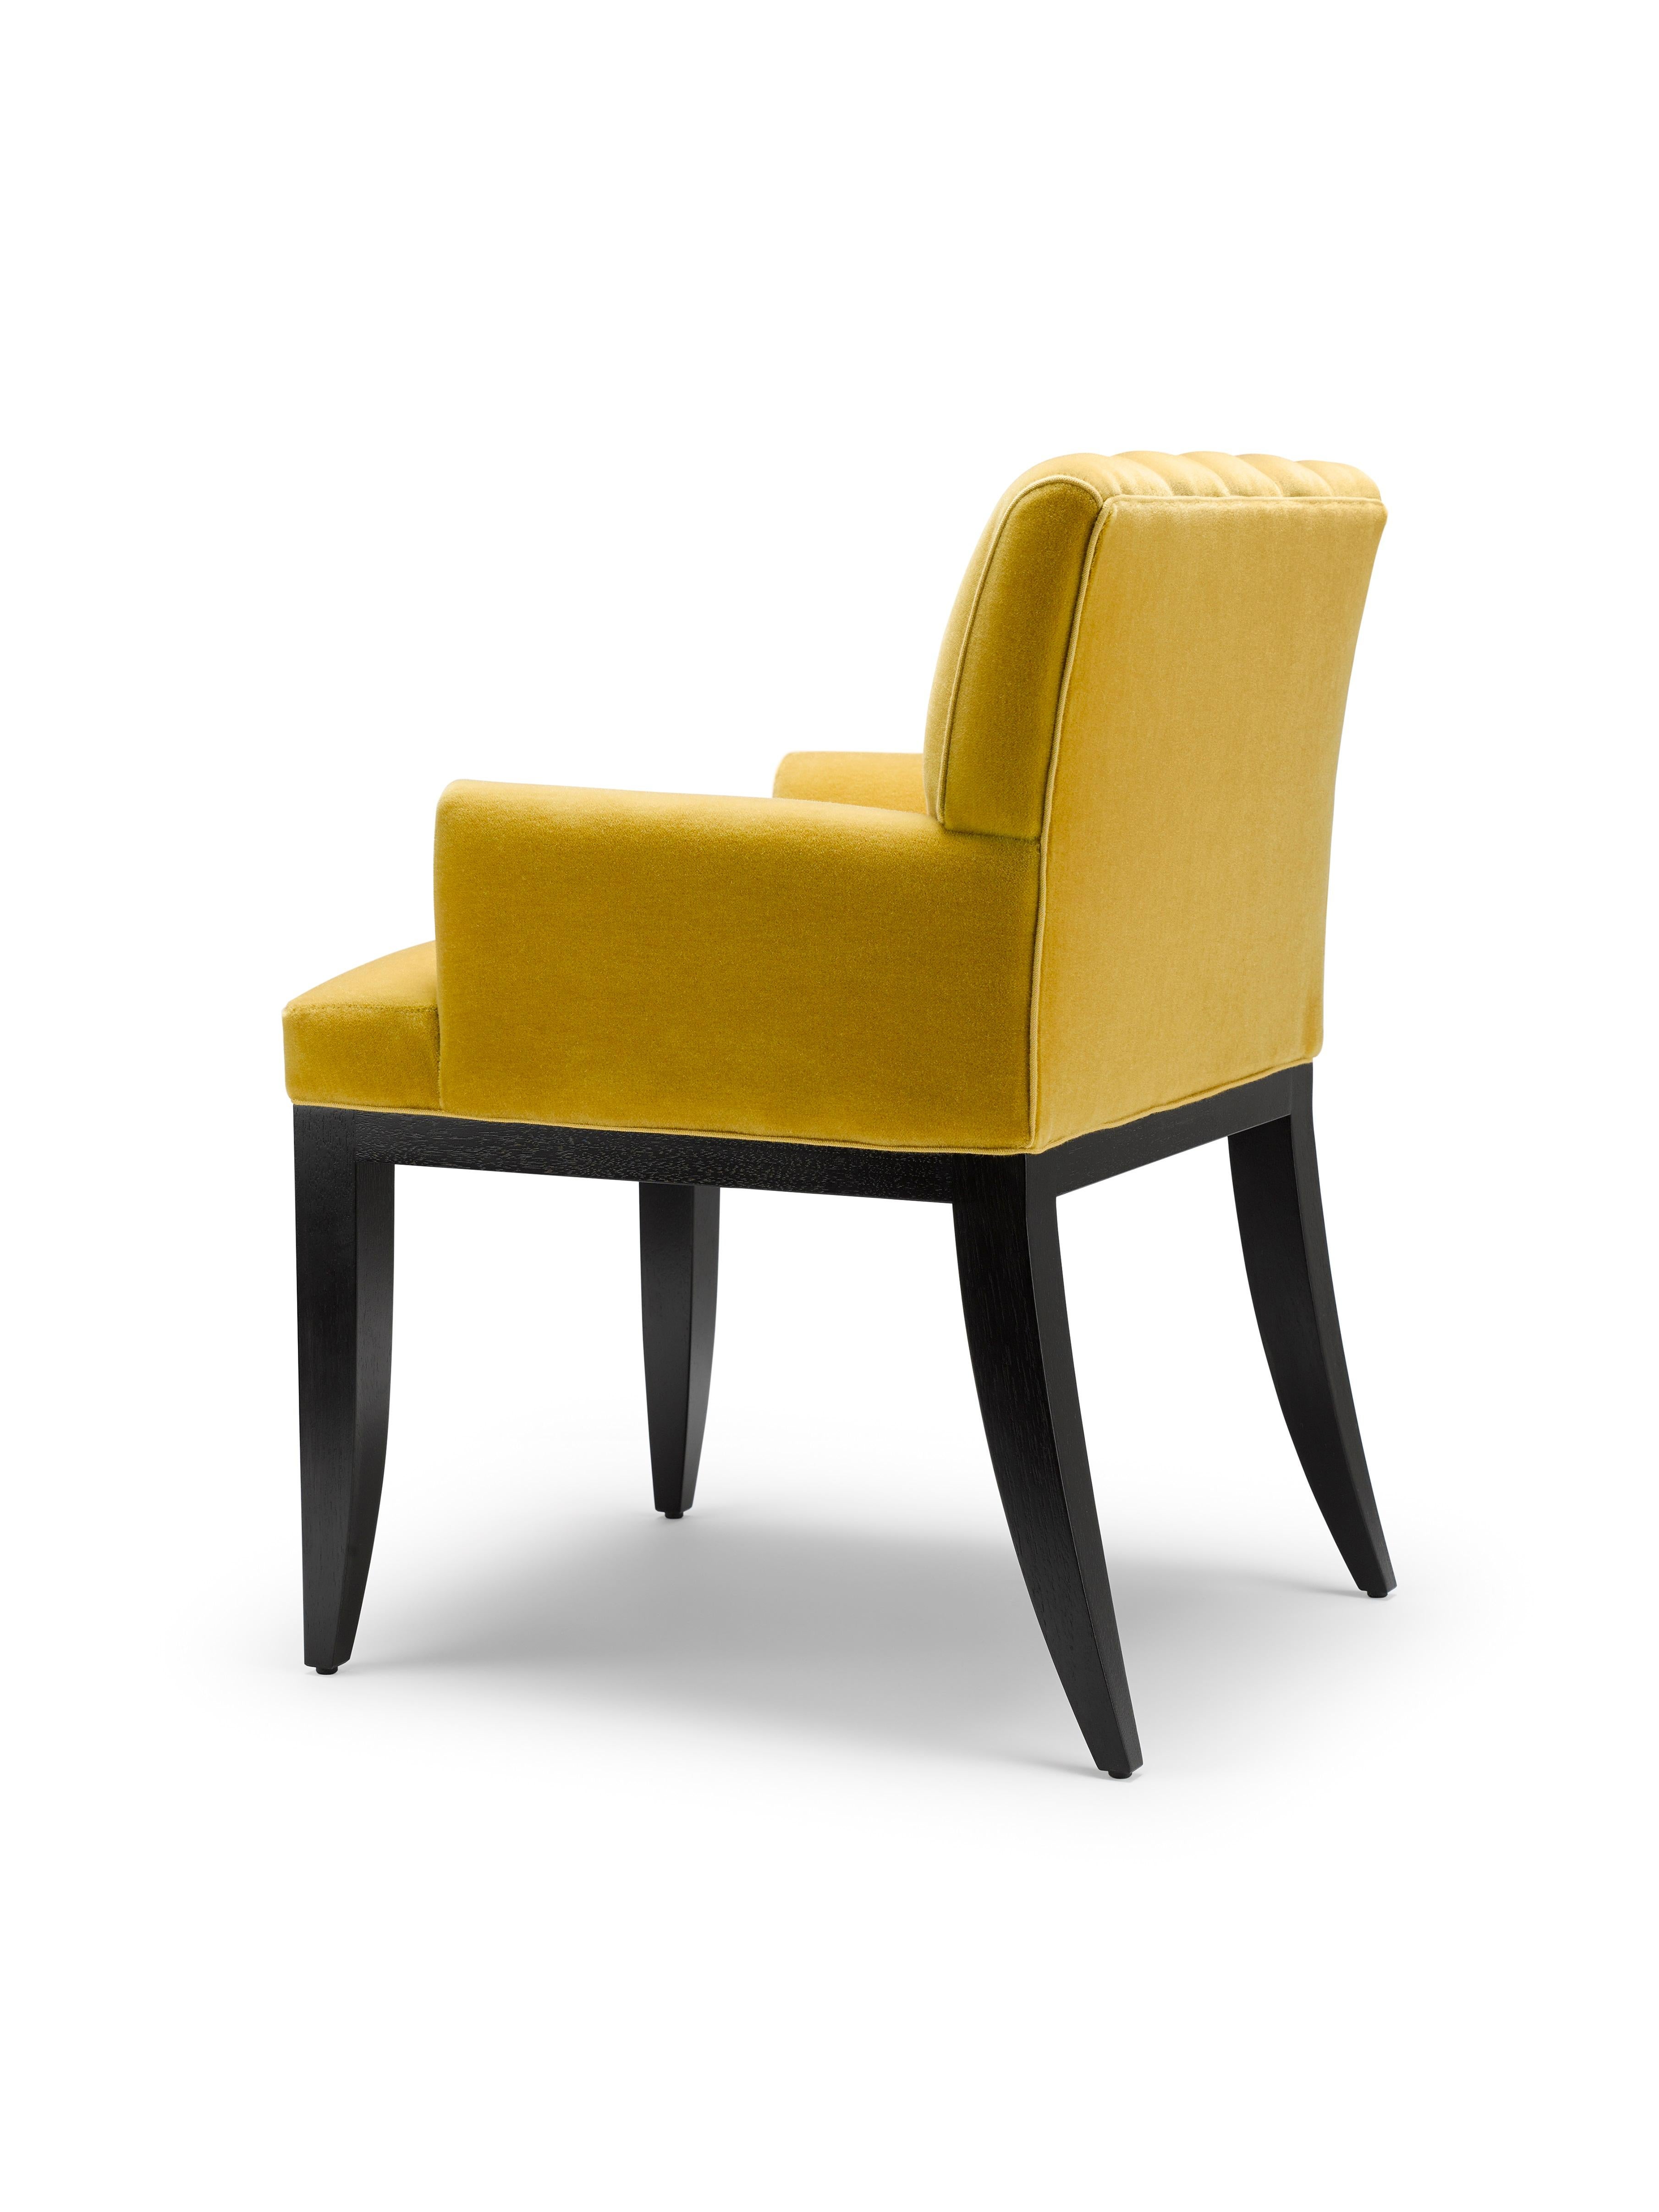 English Contemporary Felix carver Chair in Yellow Mohair with Solid Walnut Legs For Sale